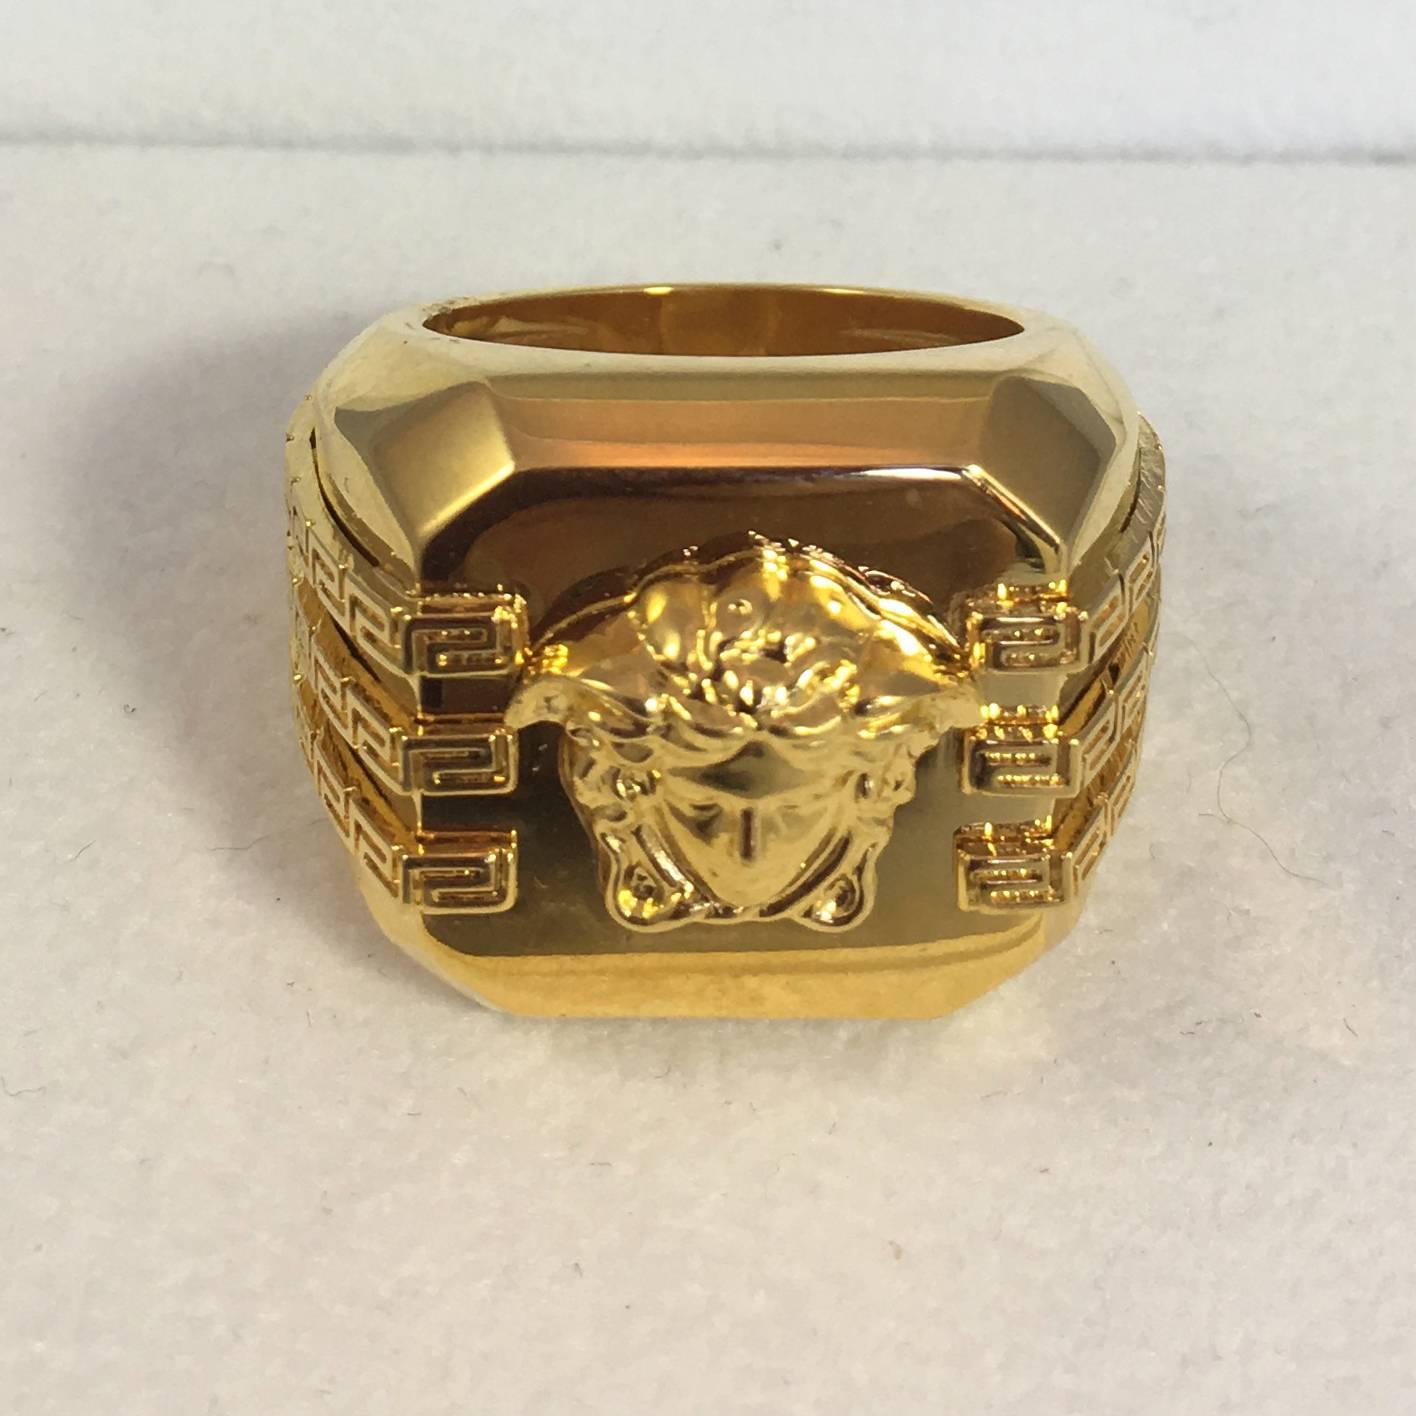 Versace Goldtone Monogram Jellyfish Ring in box with tag.

Size 10 1/2.

New Condition: New, never used. 